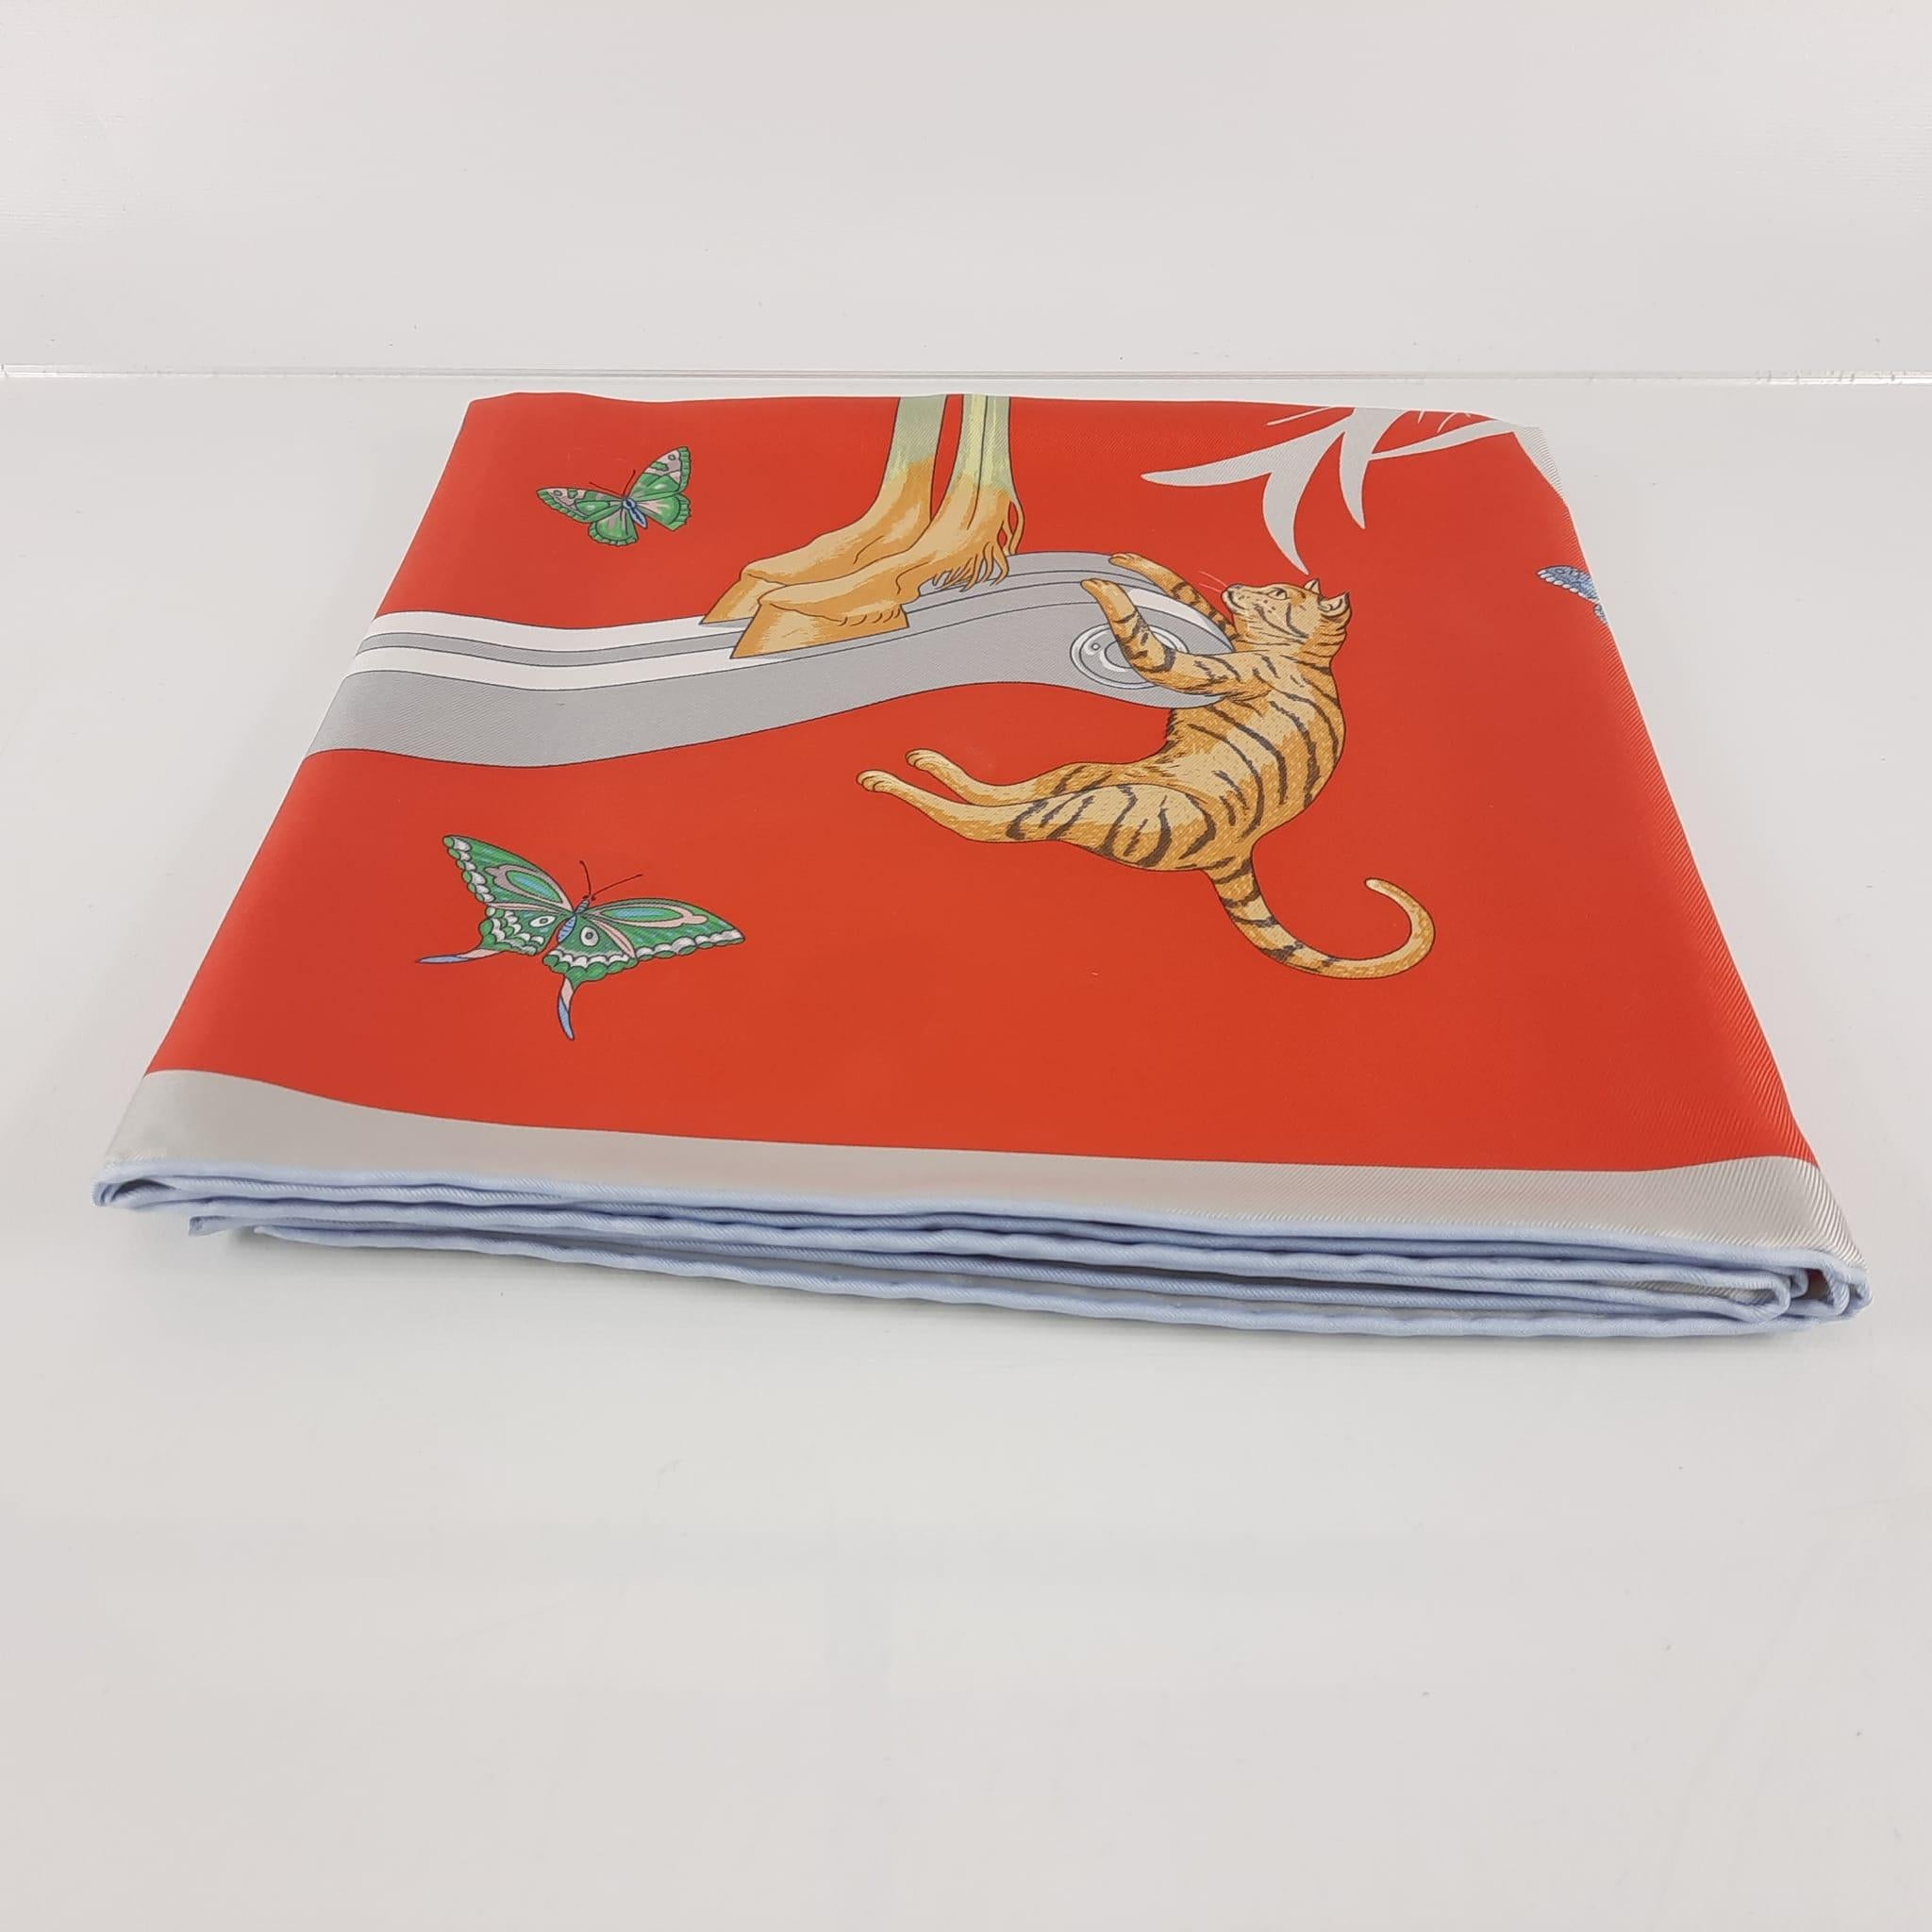 Scarf in silk twill with hand-rolled edges 
This essential Hermès accessory complements any outfit. It can be worn many ways - around your neck, as a top, at the waist or as a headscarf!
Made in France
Designed by Jonathan Burton
Dimensions: 90 x 90